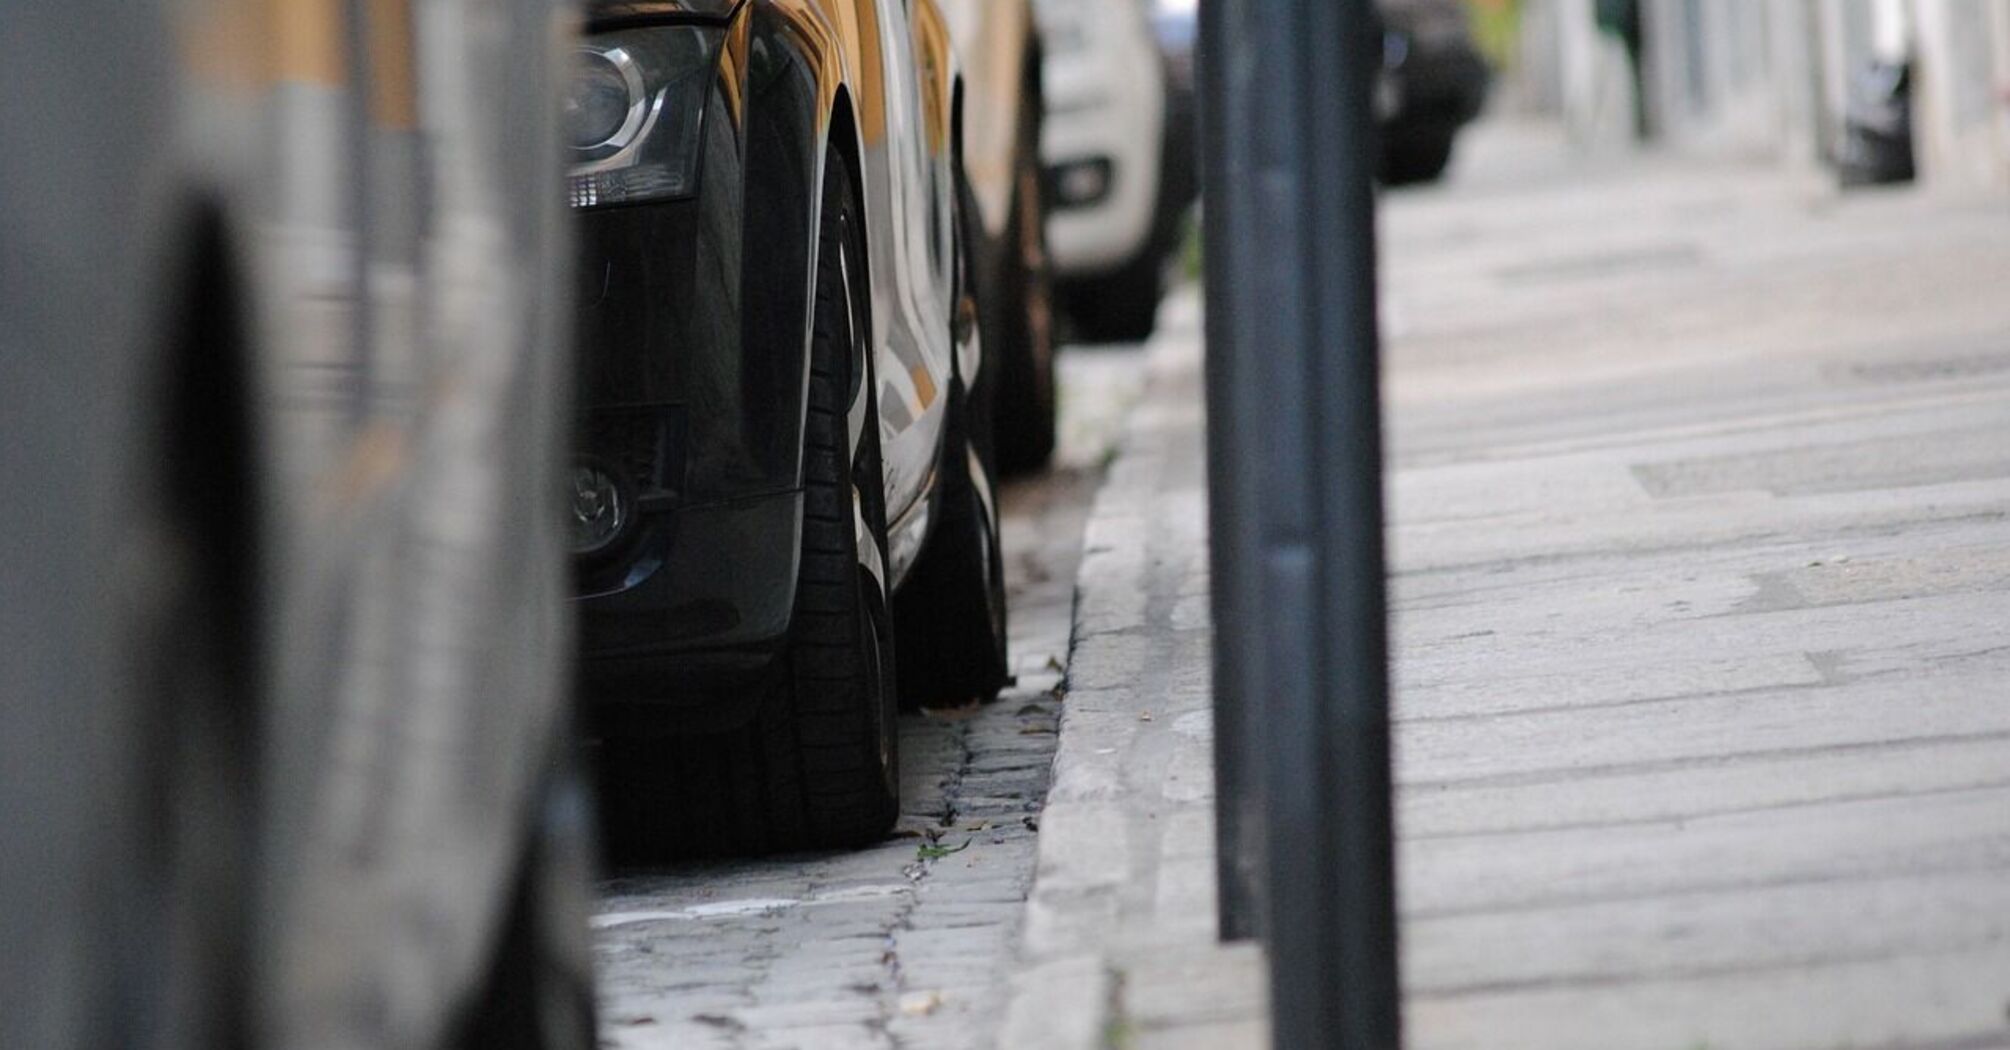 A new law could restrict "nuisance" pavement parking